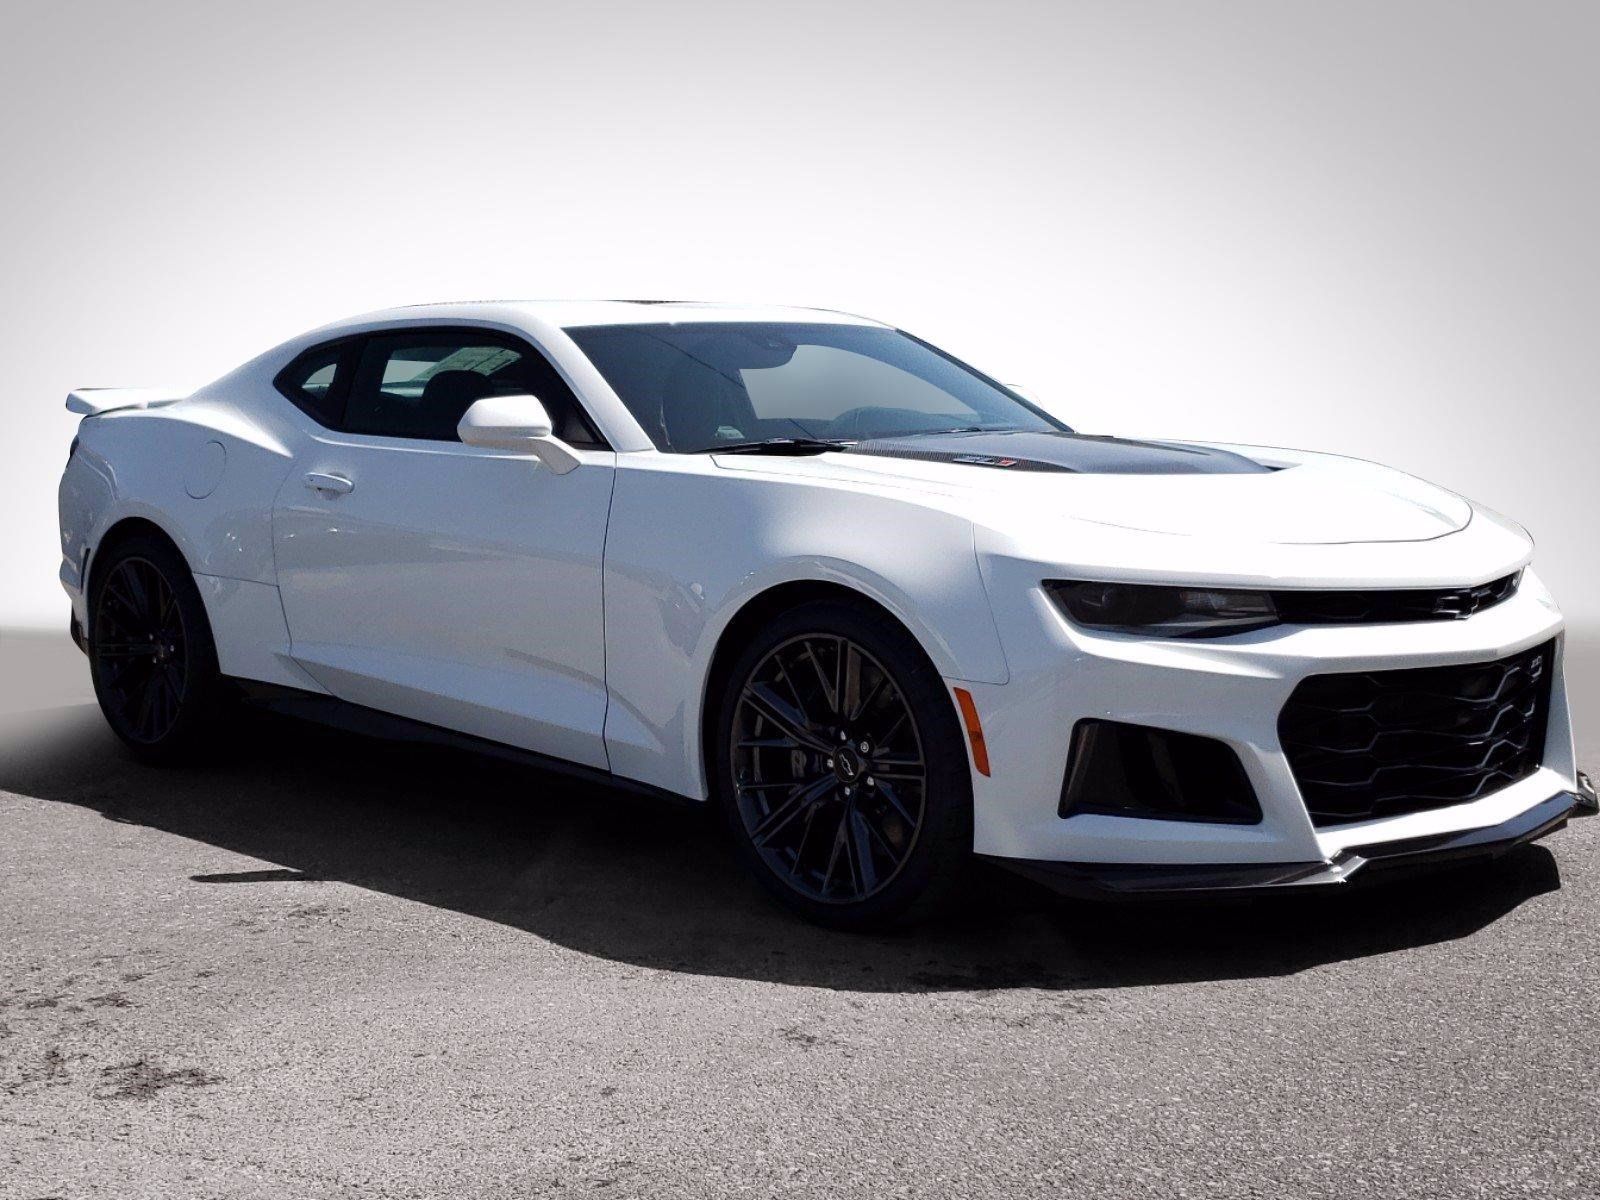 New 2021 Chevrolet Camaro ZL1 Coupe in Duluth #M01661. Rick Hendrick Chevrolet Duluth